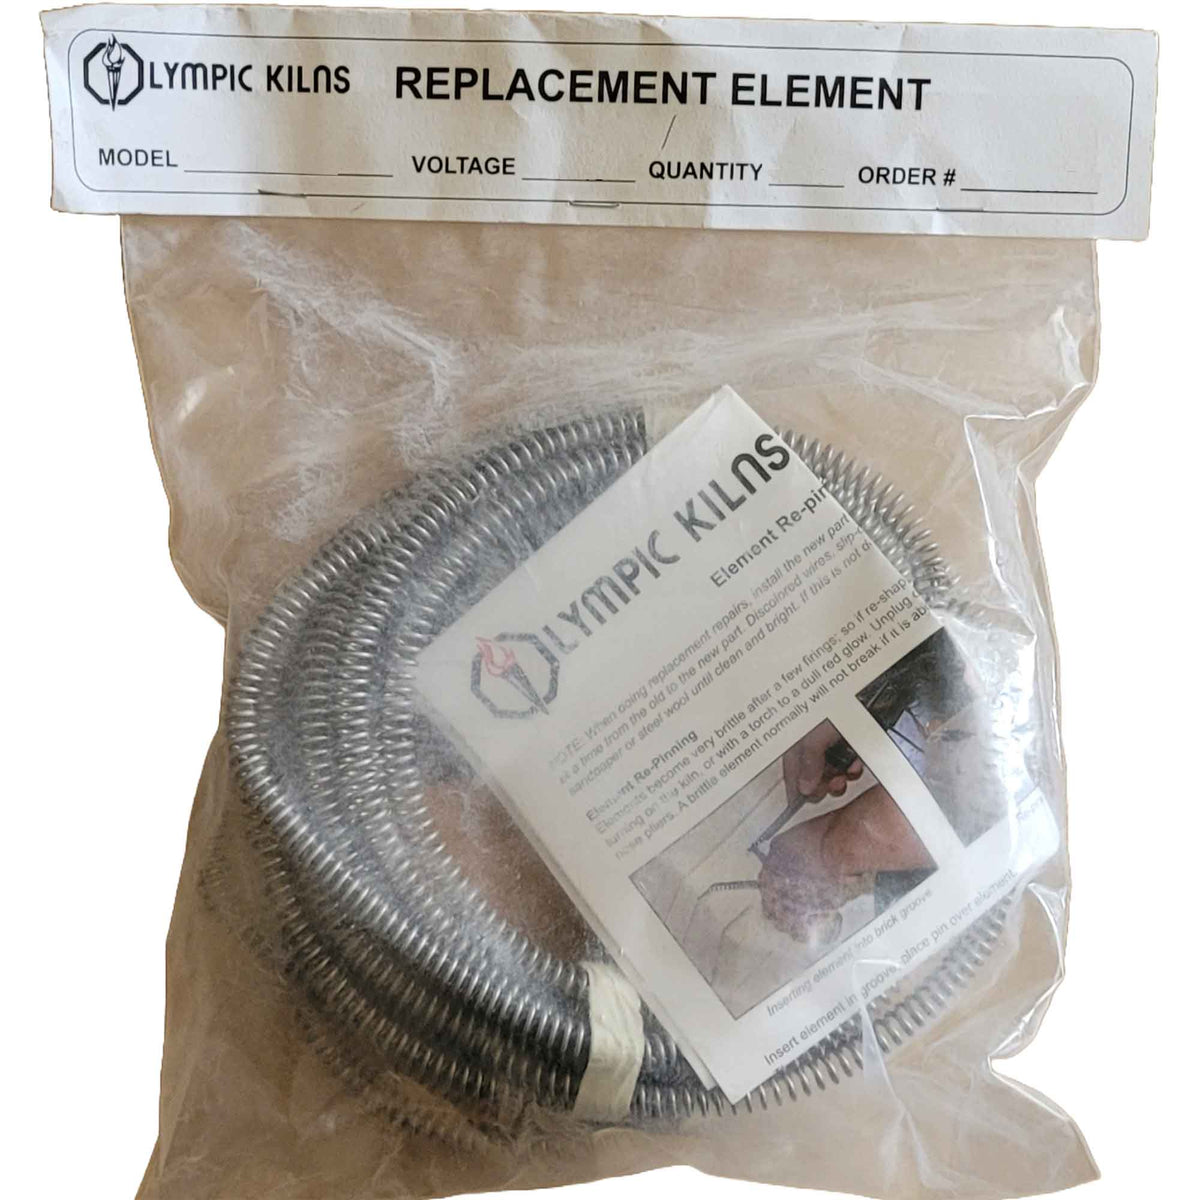 Olympic Kiln Replacement Element for Model 2827 or 2827H - 56 Amp Models